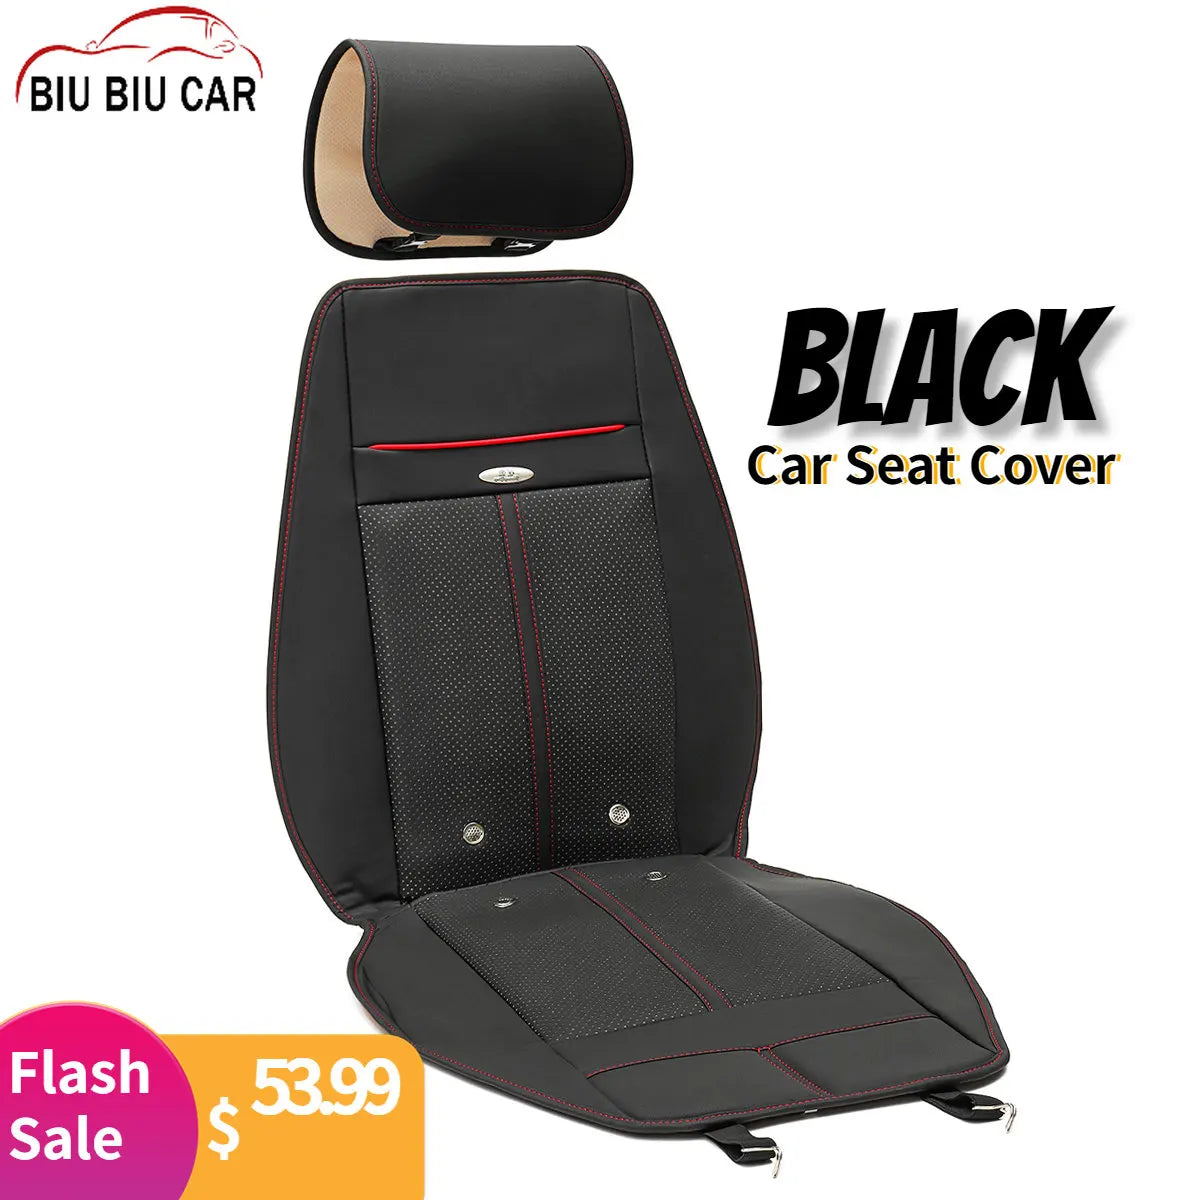 {Flash Sale}3 In 1 Car Seat Cover Cooling Warm Heated Massage Chair Cushion 8 Built-in Fan Cooling Cushion Cover Air Ventilated